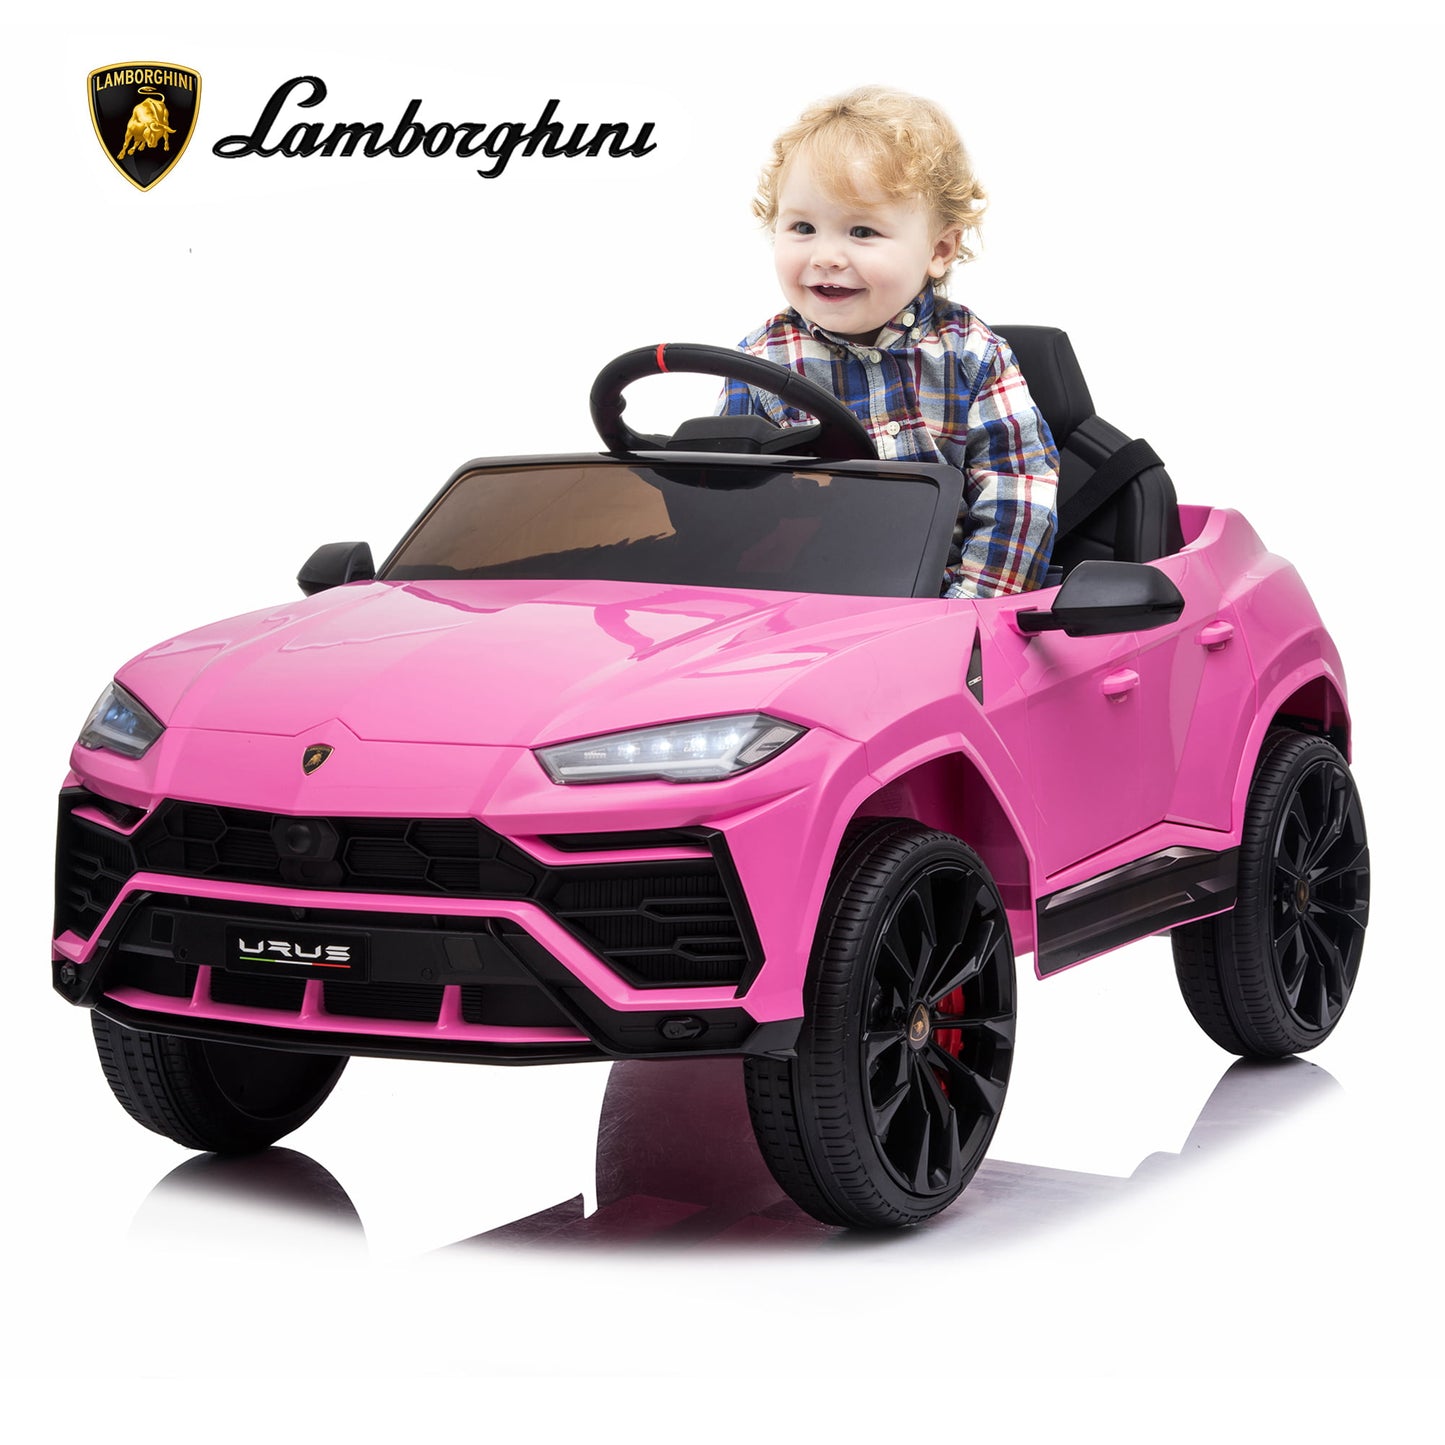 iRerts 12V Kids Ride On Toys Car Electric with Remote Control, Safety Belt, MP3 Player, Horn, LED Headlight for Boys Girls Christmas Gift,Pink